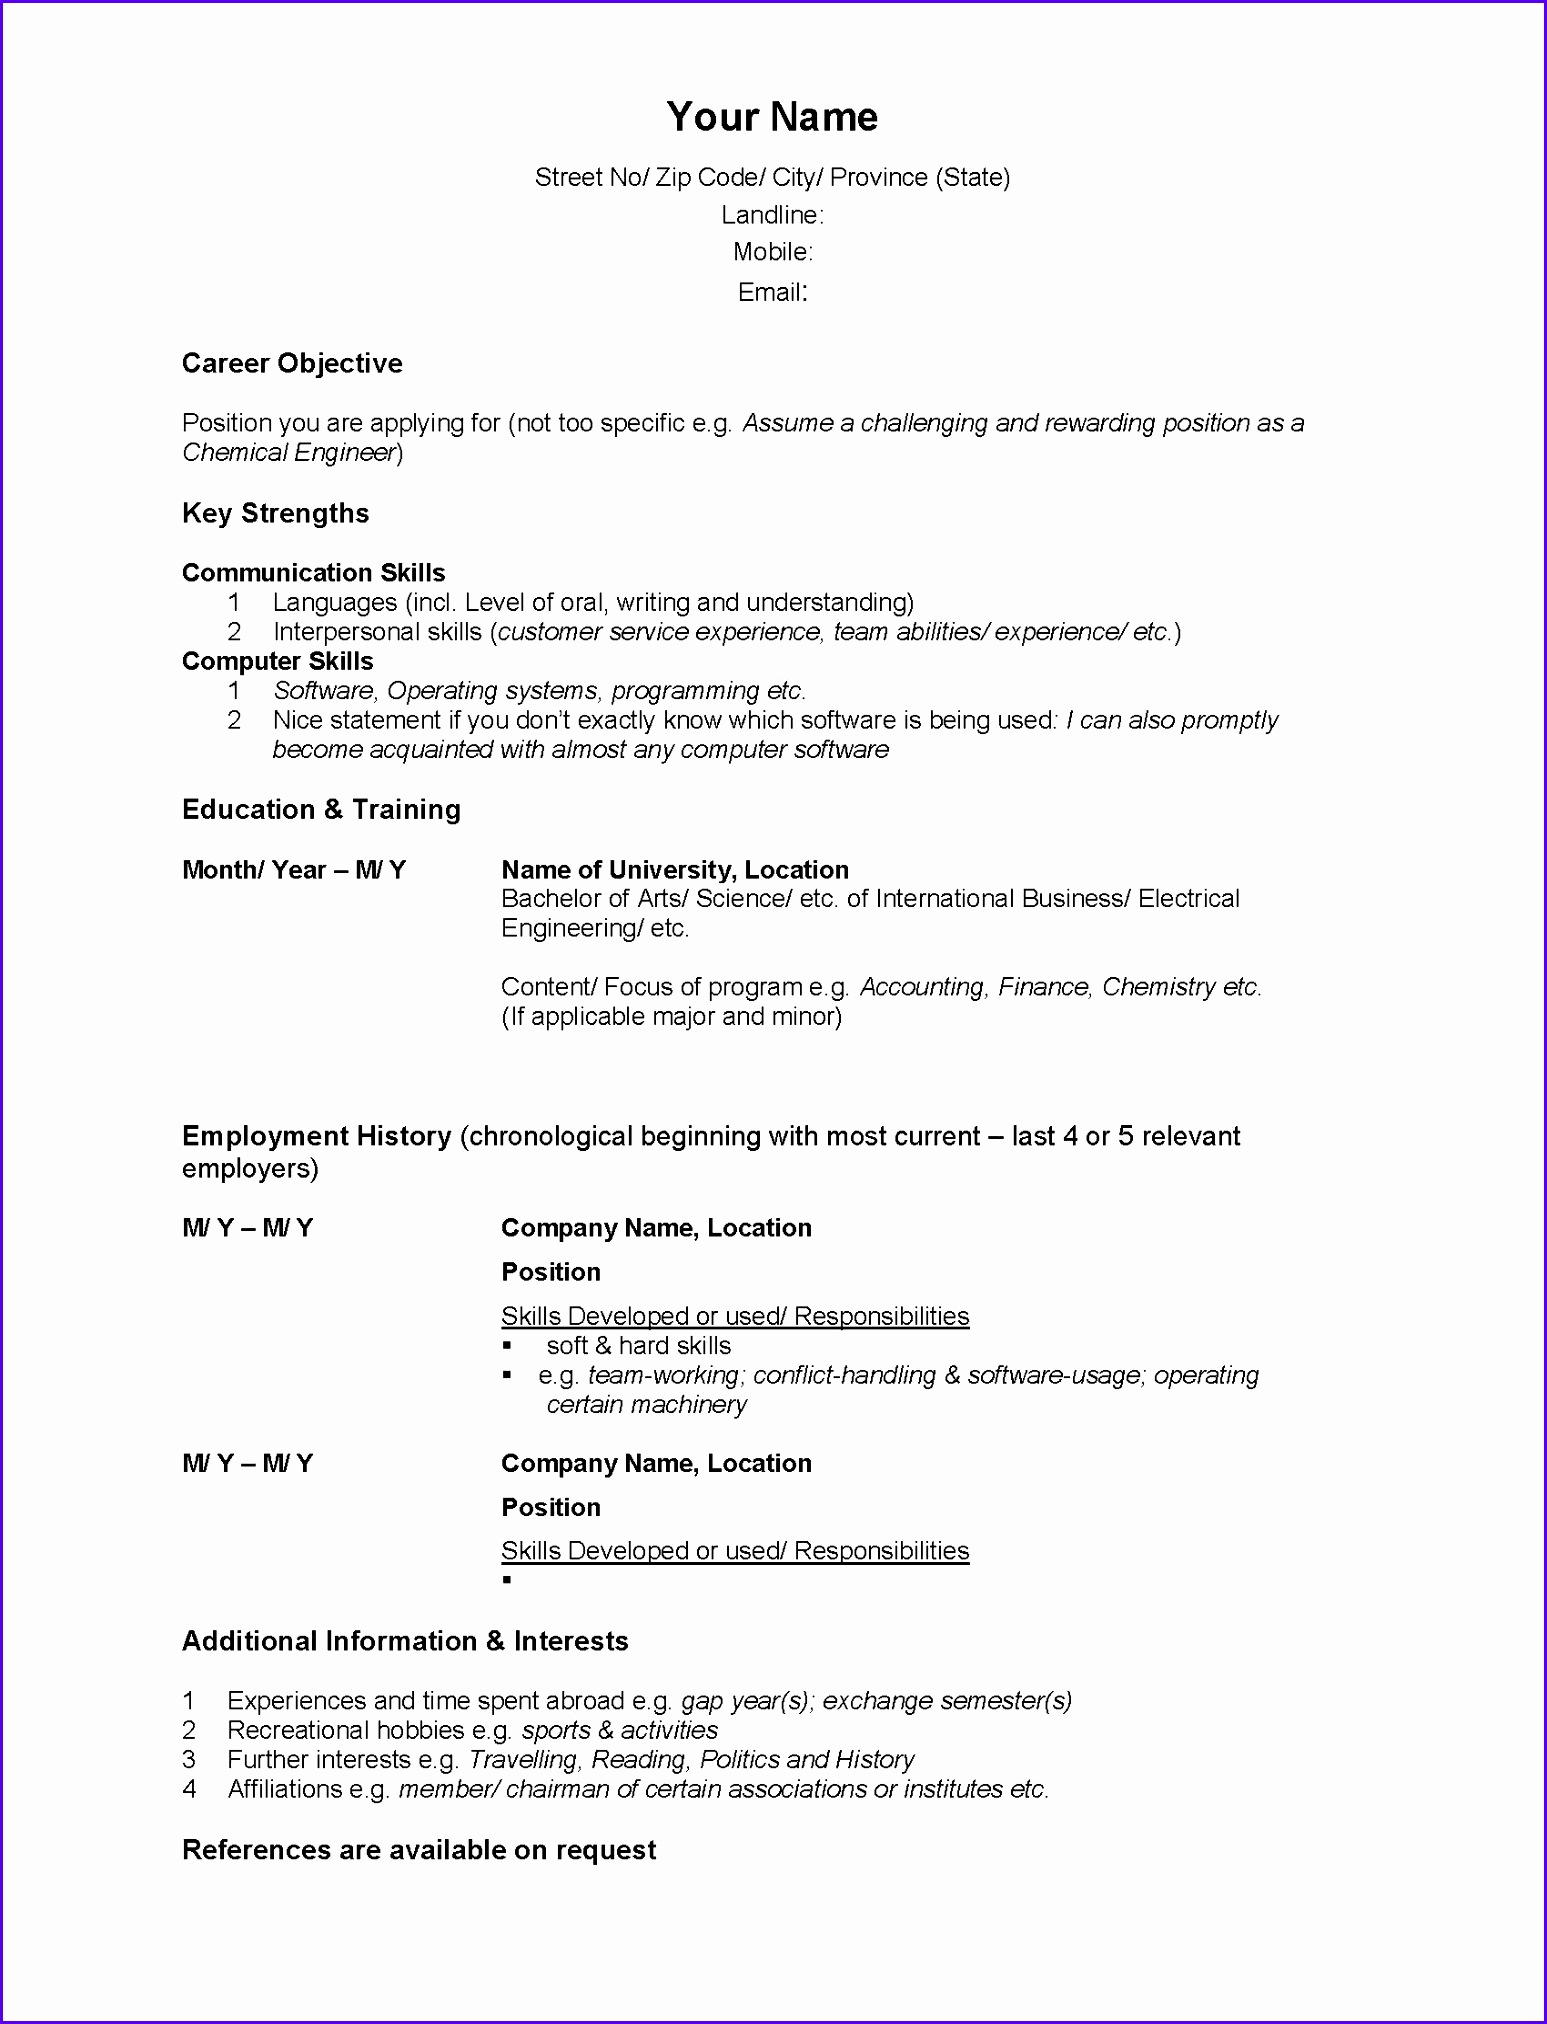 Customer Service Resume Template Awesome Best Ideas Customer Service Resume Sample Canada with